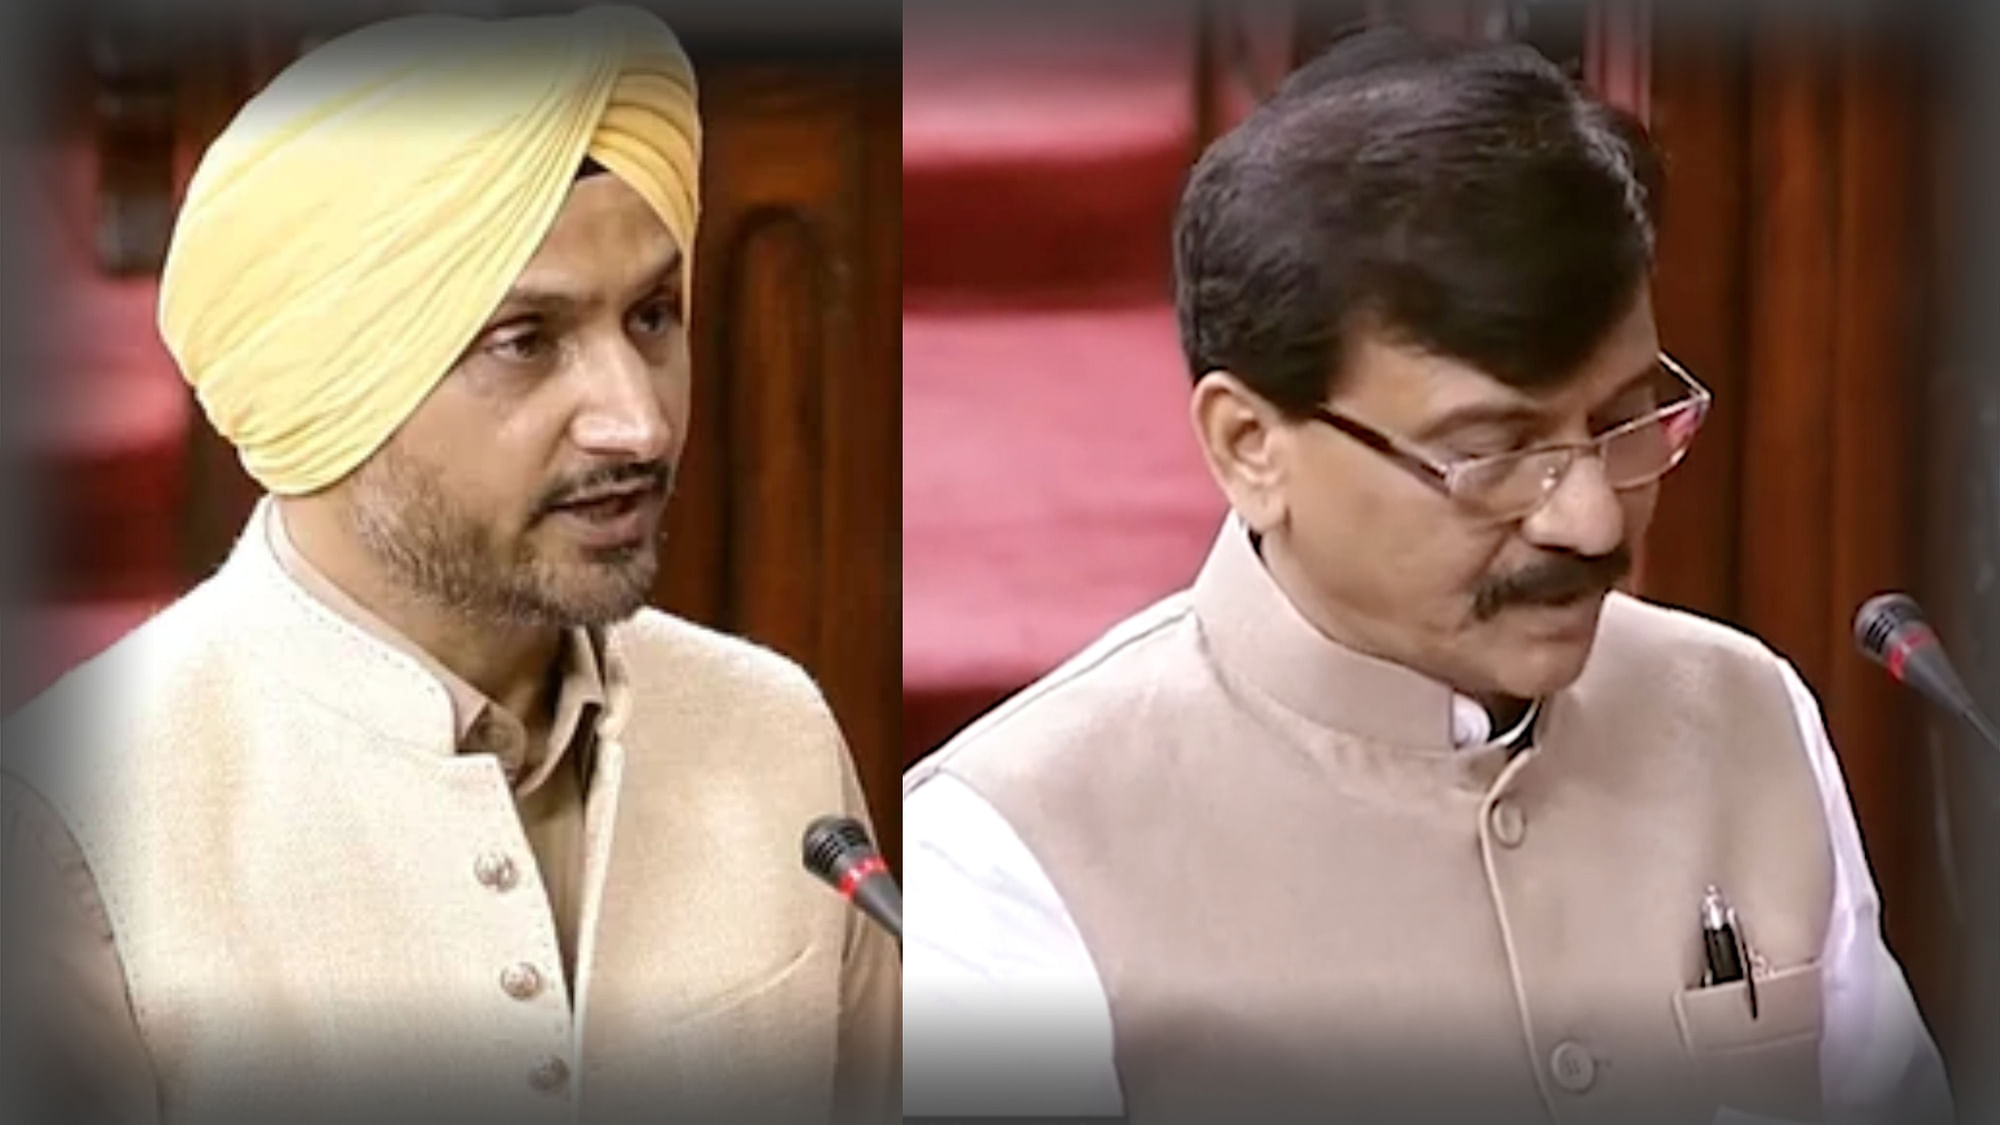 <div class="paragraphs"><p>On the first day of the <a href="https://www.thequint.com/news/india/monsoon-session-2022-new-key-bills-introduced-parliament-government">Monsoon Session of the Parliament</a> on Monday, 18 July, newly elected members from various political parties took oath. While four members took oath in the <a href="https://www.thequint.com/topic/rajya-sabha">Lok Sabha</a>, 28 took oath as <a href="https://www.thequint.com/topic/rajya-sabha">Rajya Sabha</a> MPs.</p></div>